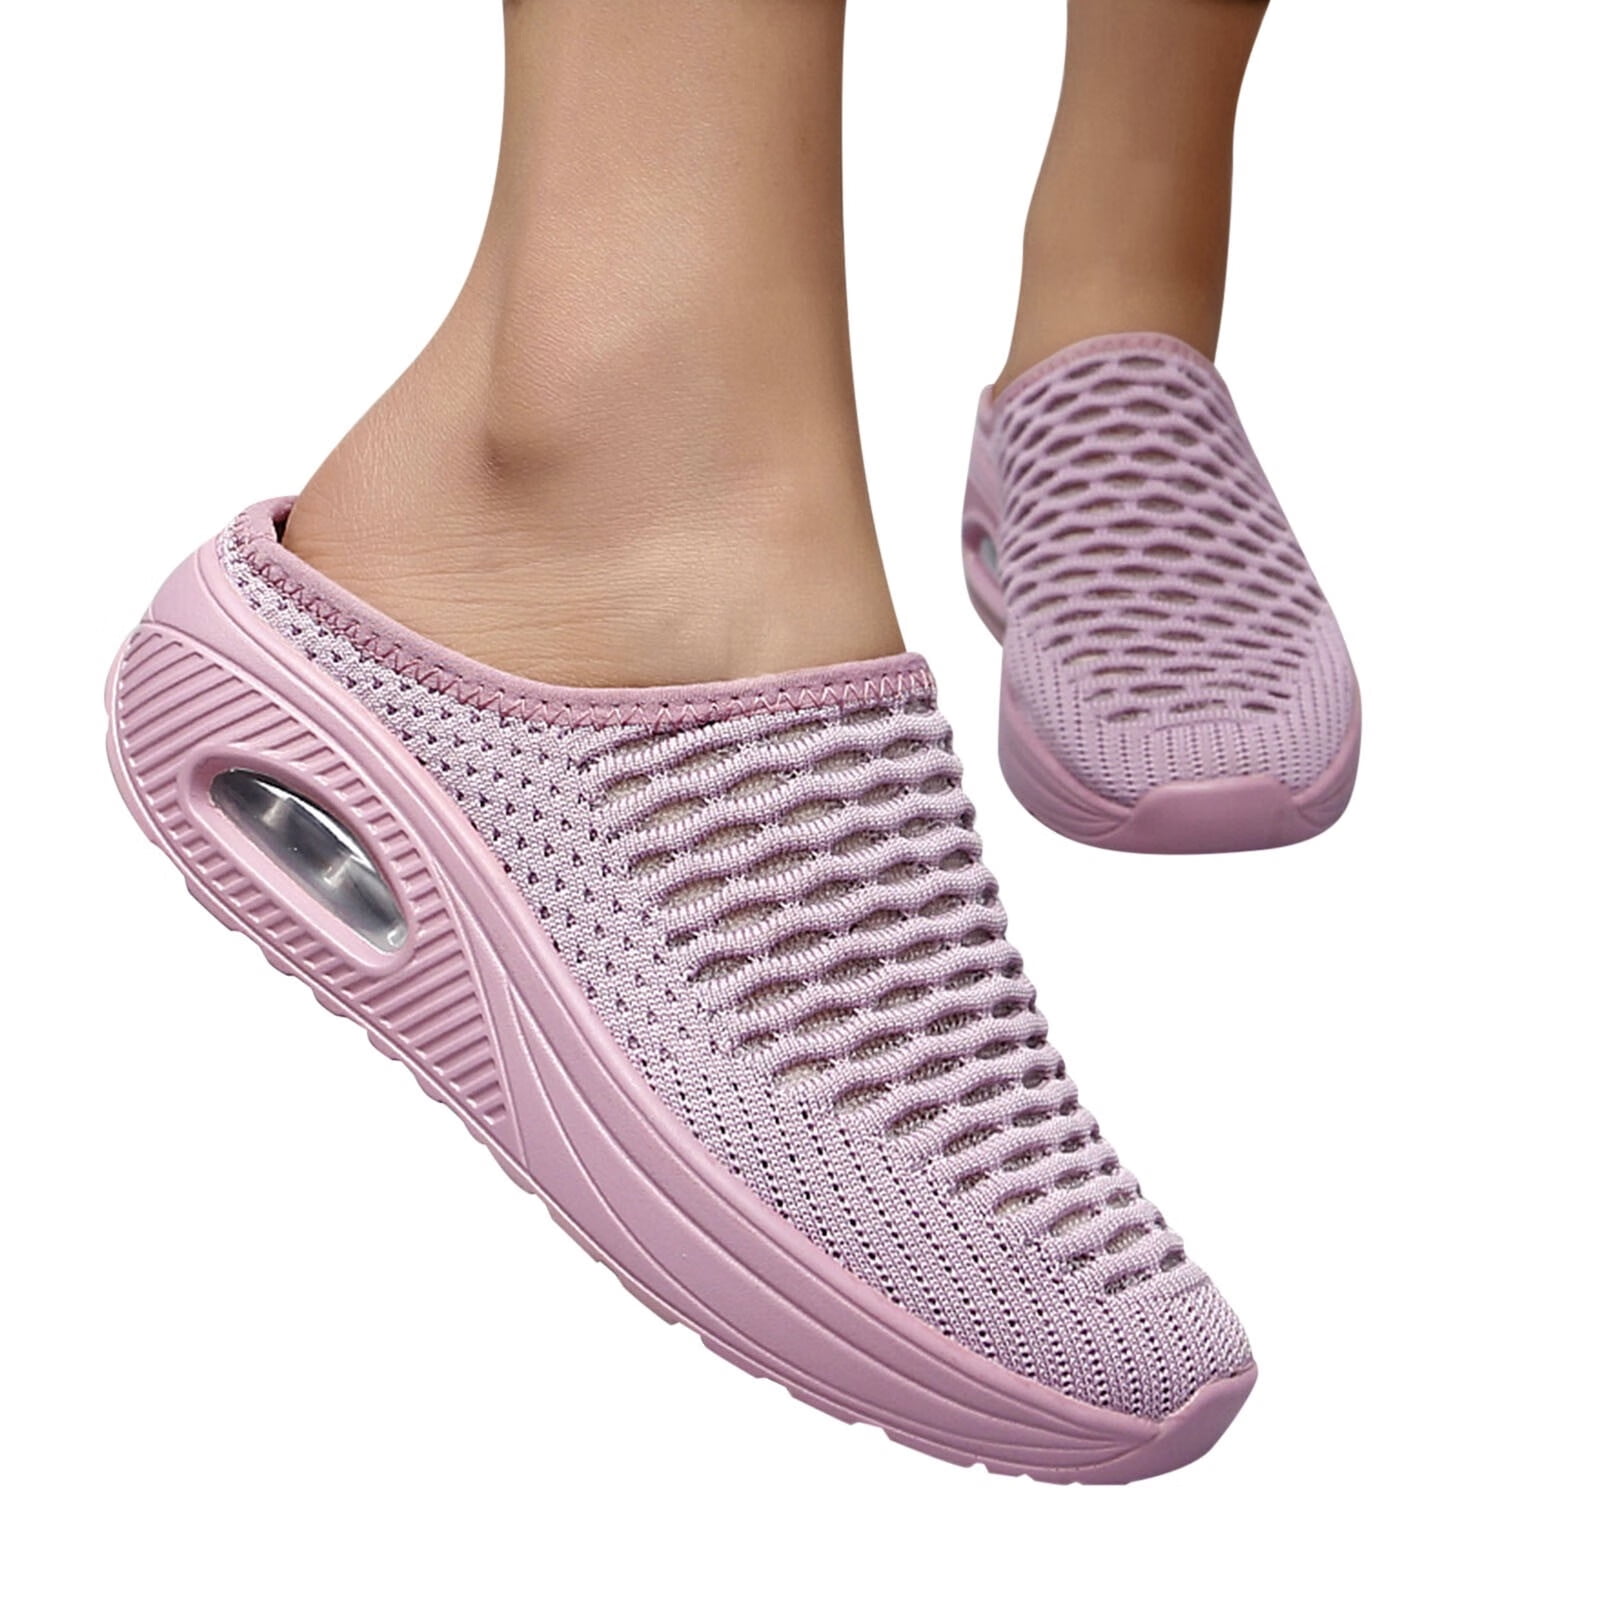 Forestyashe Sneakers for Women Ladies Shoes Fashion Comfortable Lace Up Soft SoleMesh Breathable Casual Sneakers Womens Sneakers Mesh Pink 39, Women's